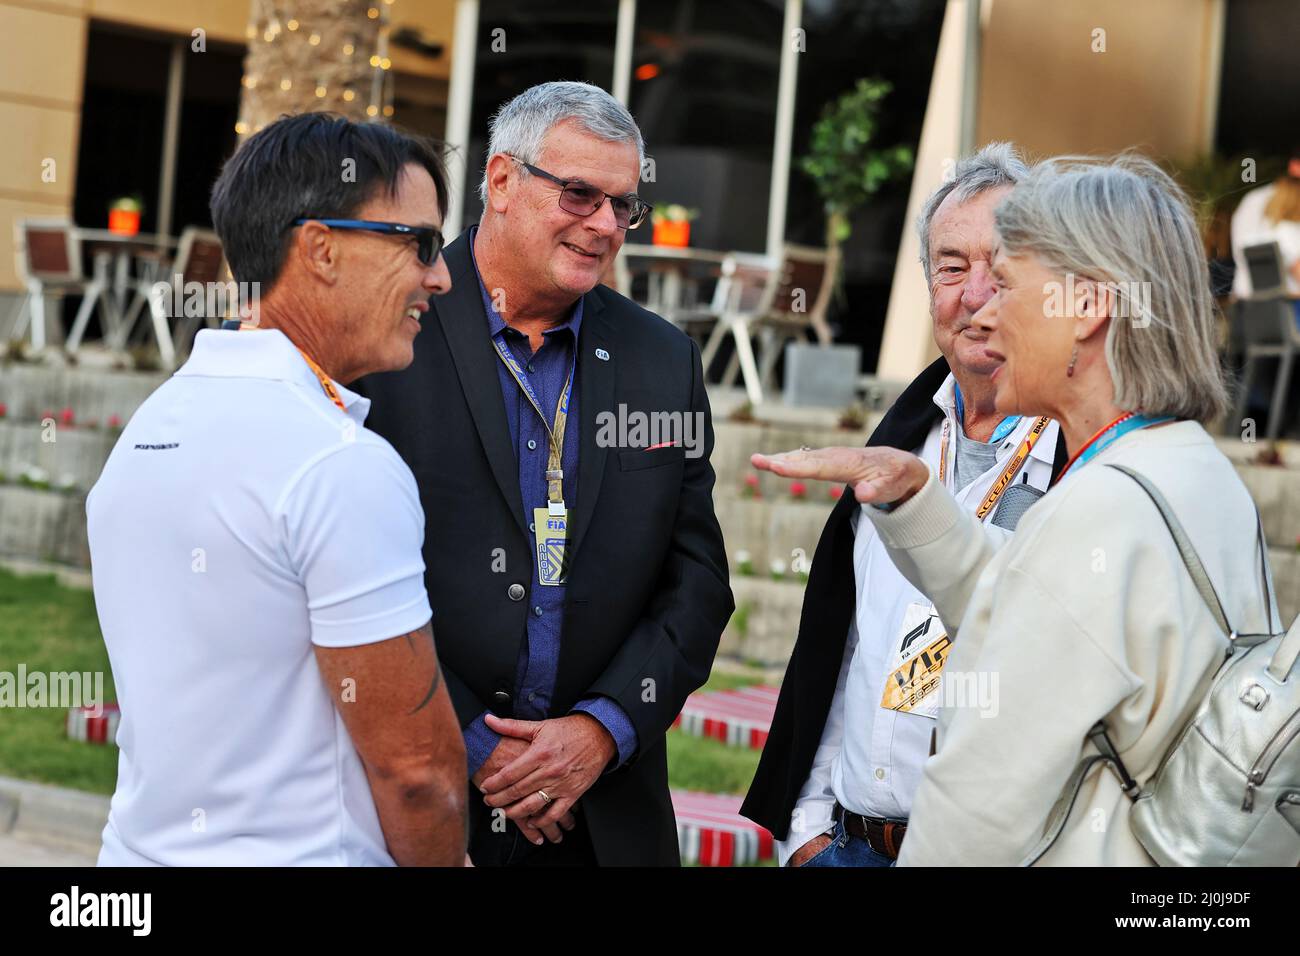 (L to R): Stuart Maloney, father of Zane Maloney (BRB) Trident F3 driver; Andrew Mallalieu (BAR) FIA Steward; Nick Mason (GBR) Pink Floyd Drummer and his wife Annette Lynton (GBR) Actress. Bahrain Grand Prix, Saturday 19th March 2022. Sakhir, Bahrain. Stock Photo